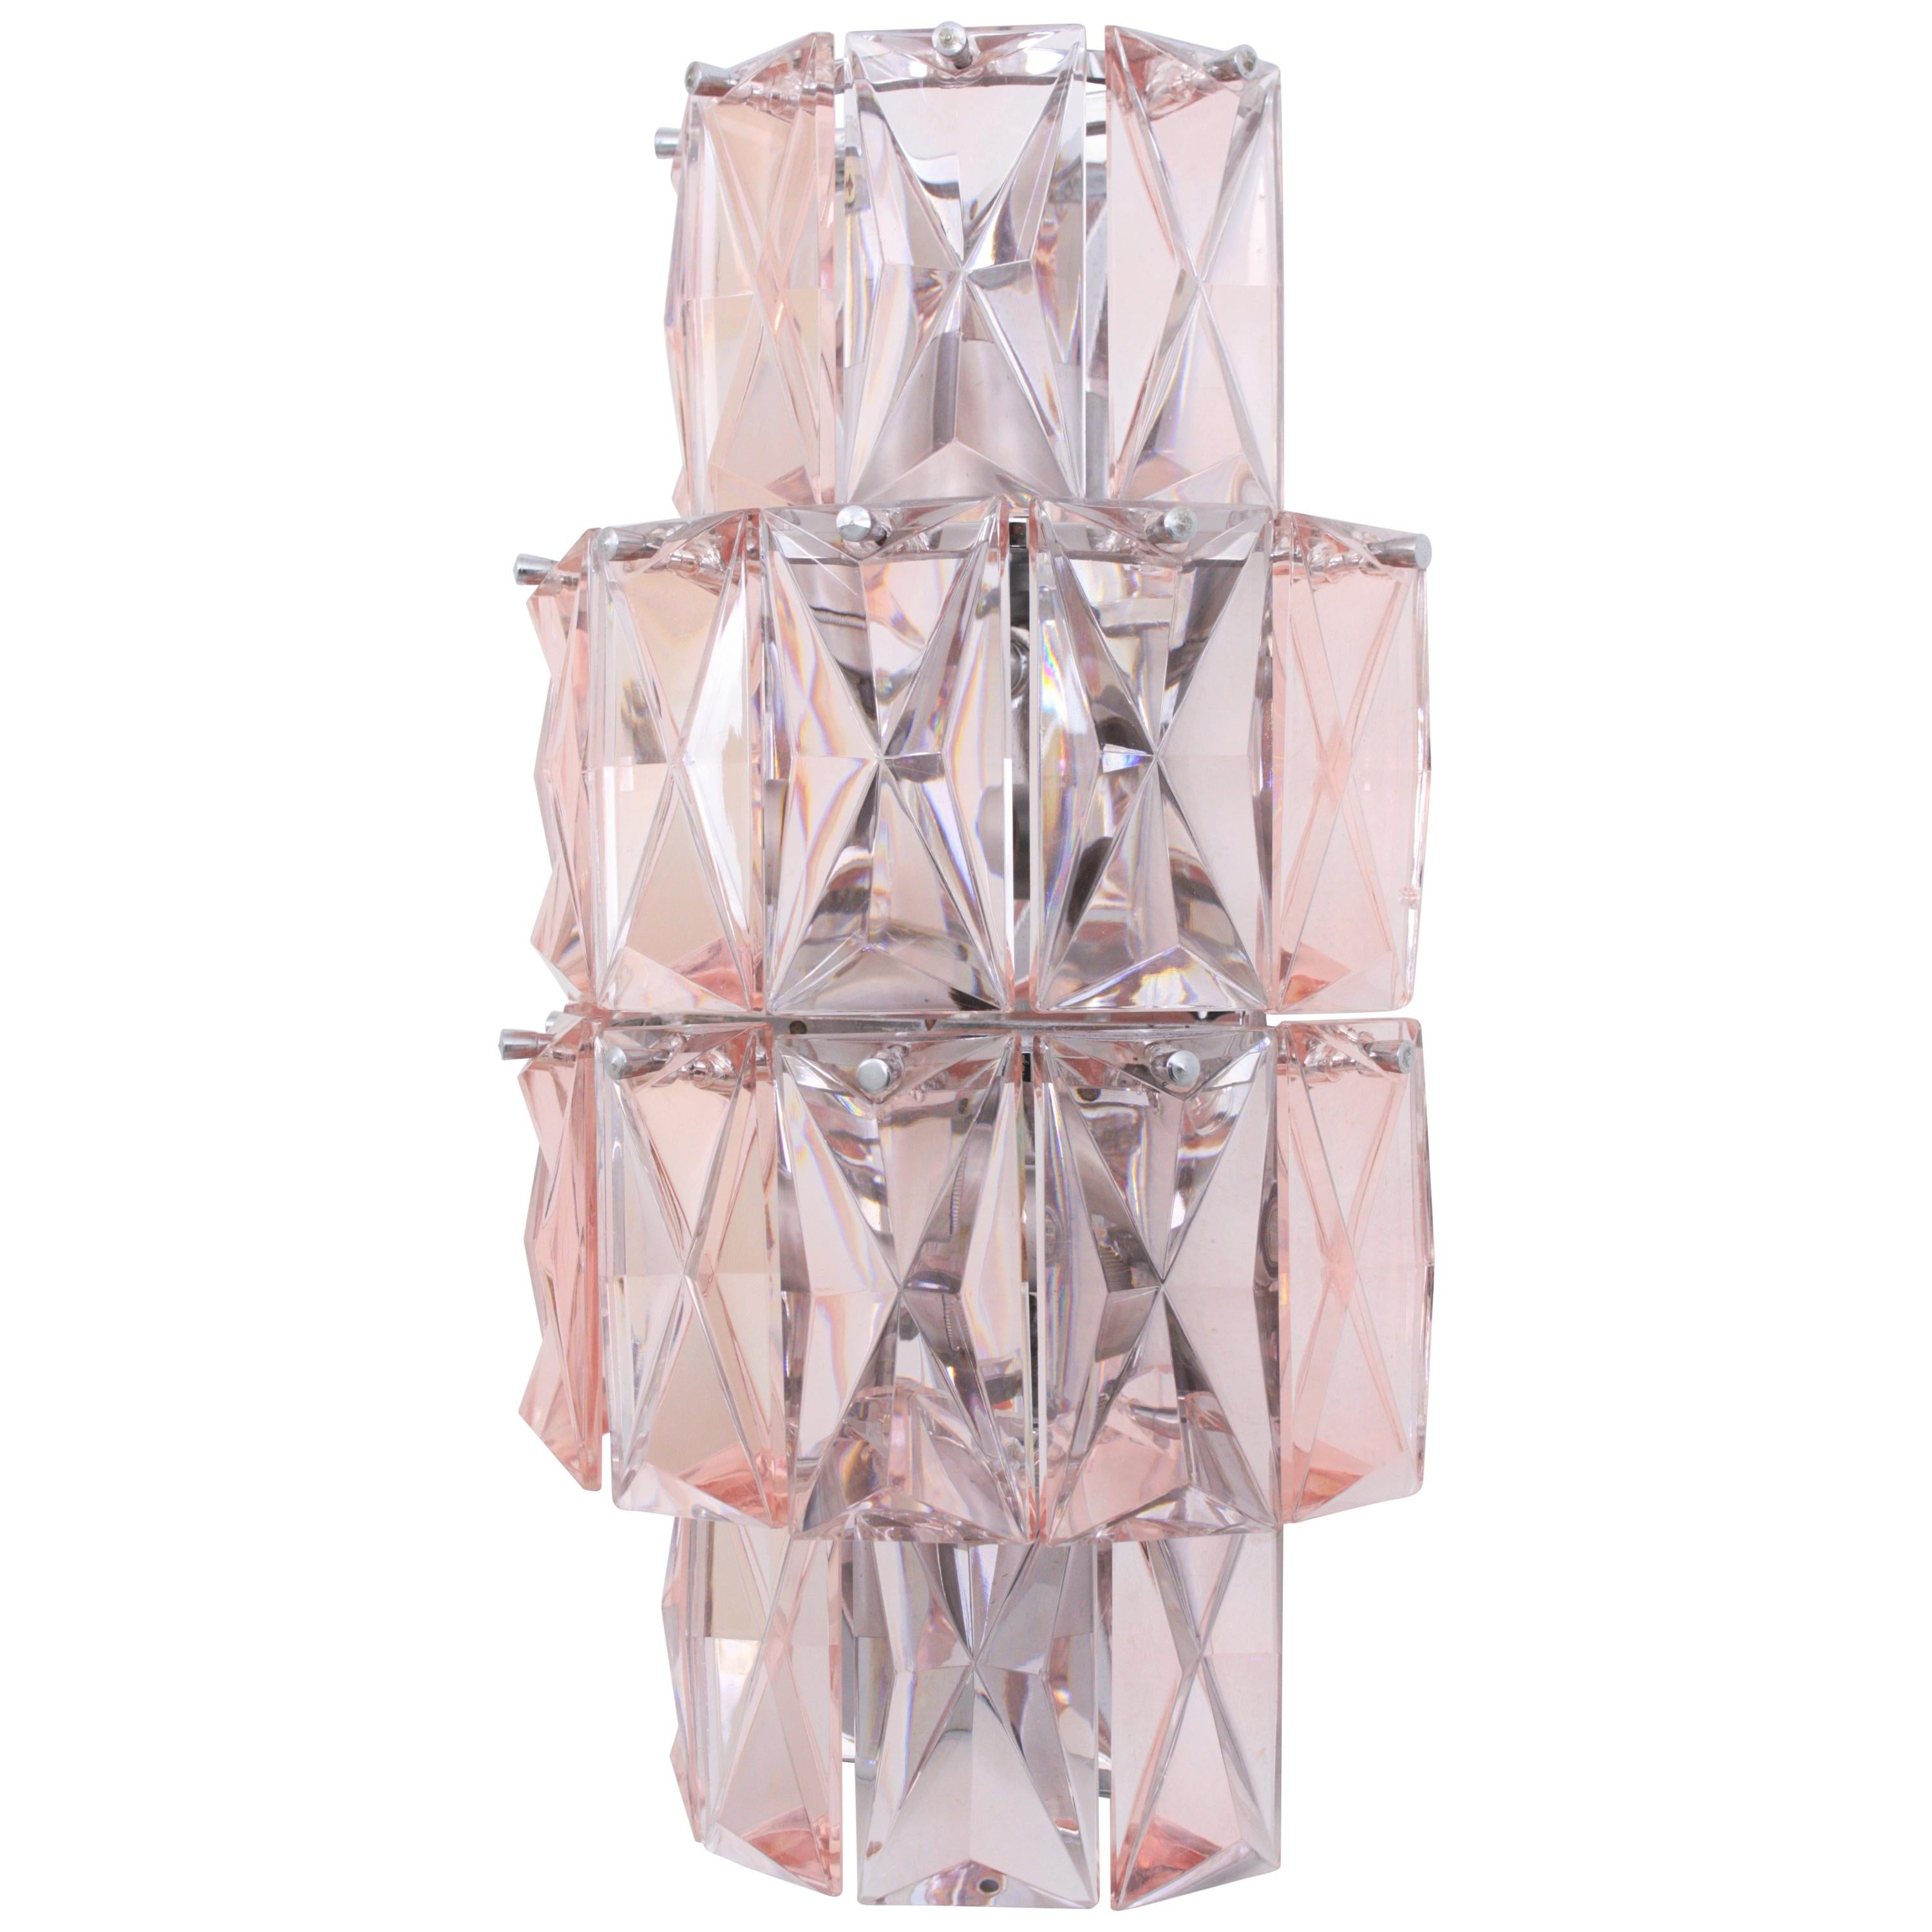 French Baccarat Pink Crystal Wall Sconce, Mid-Century Modern Period For Sale